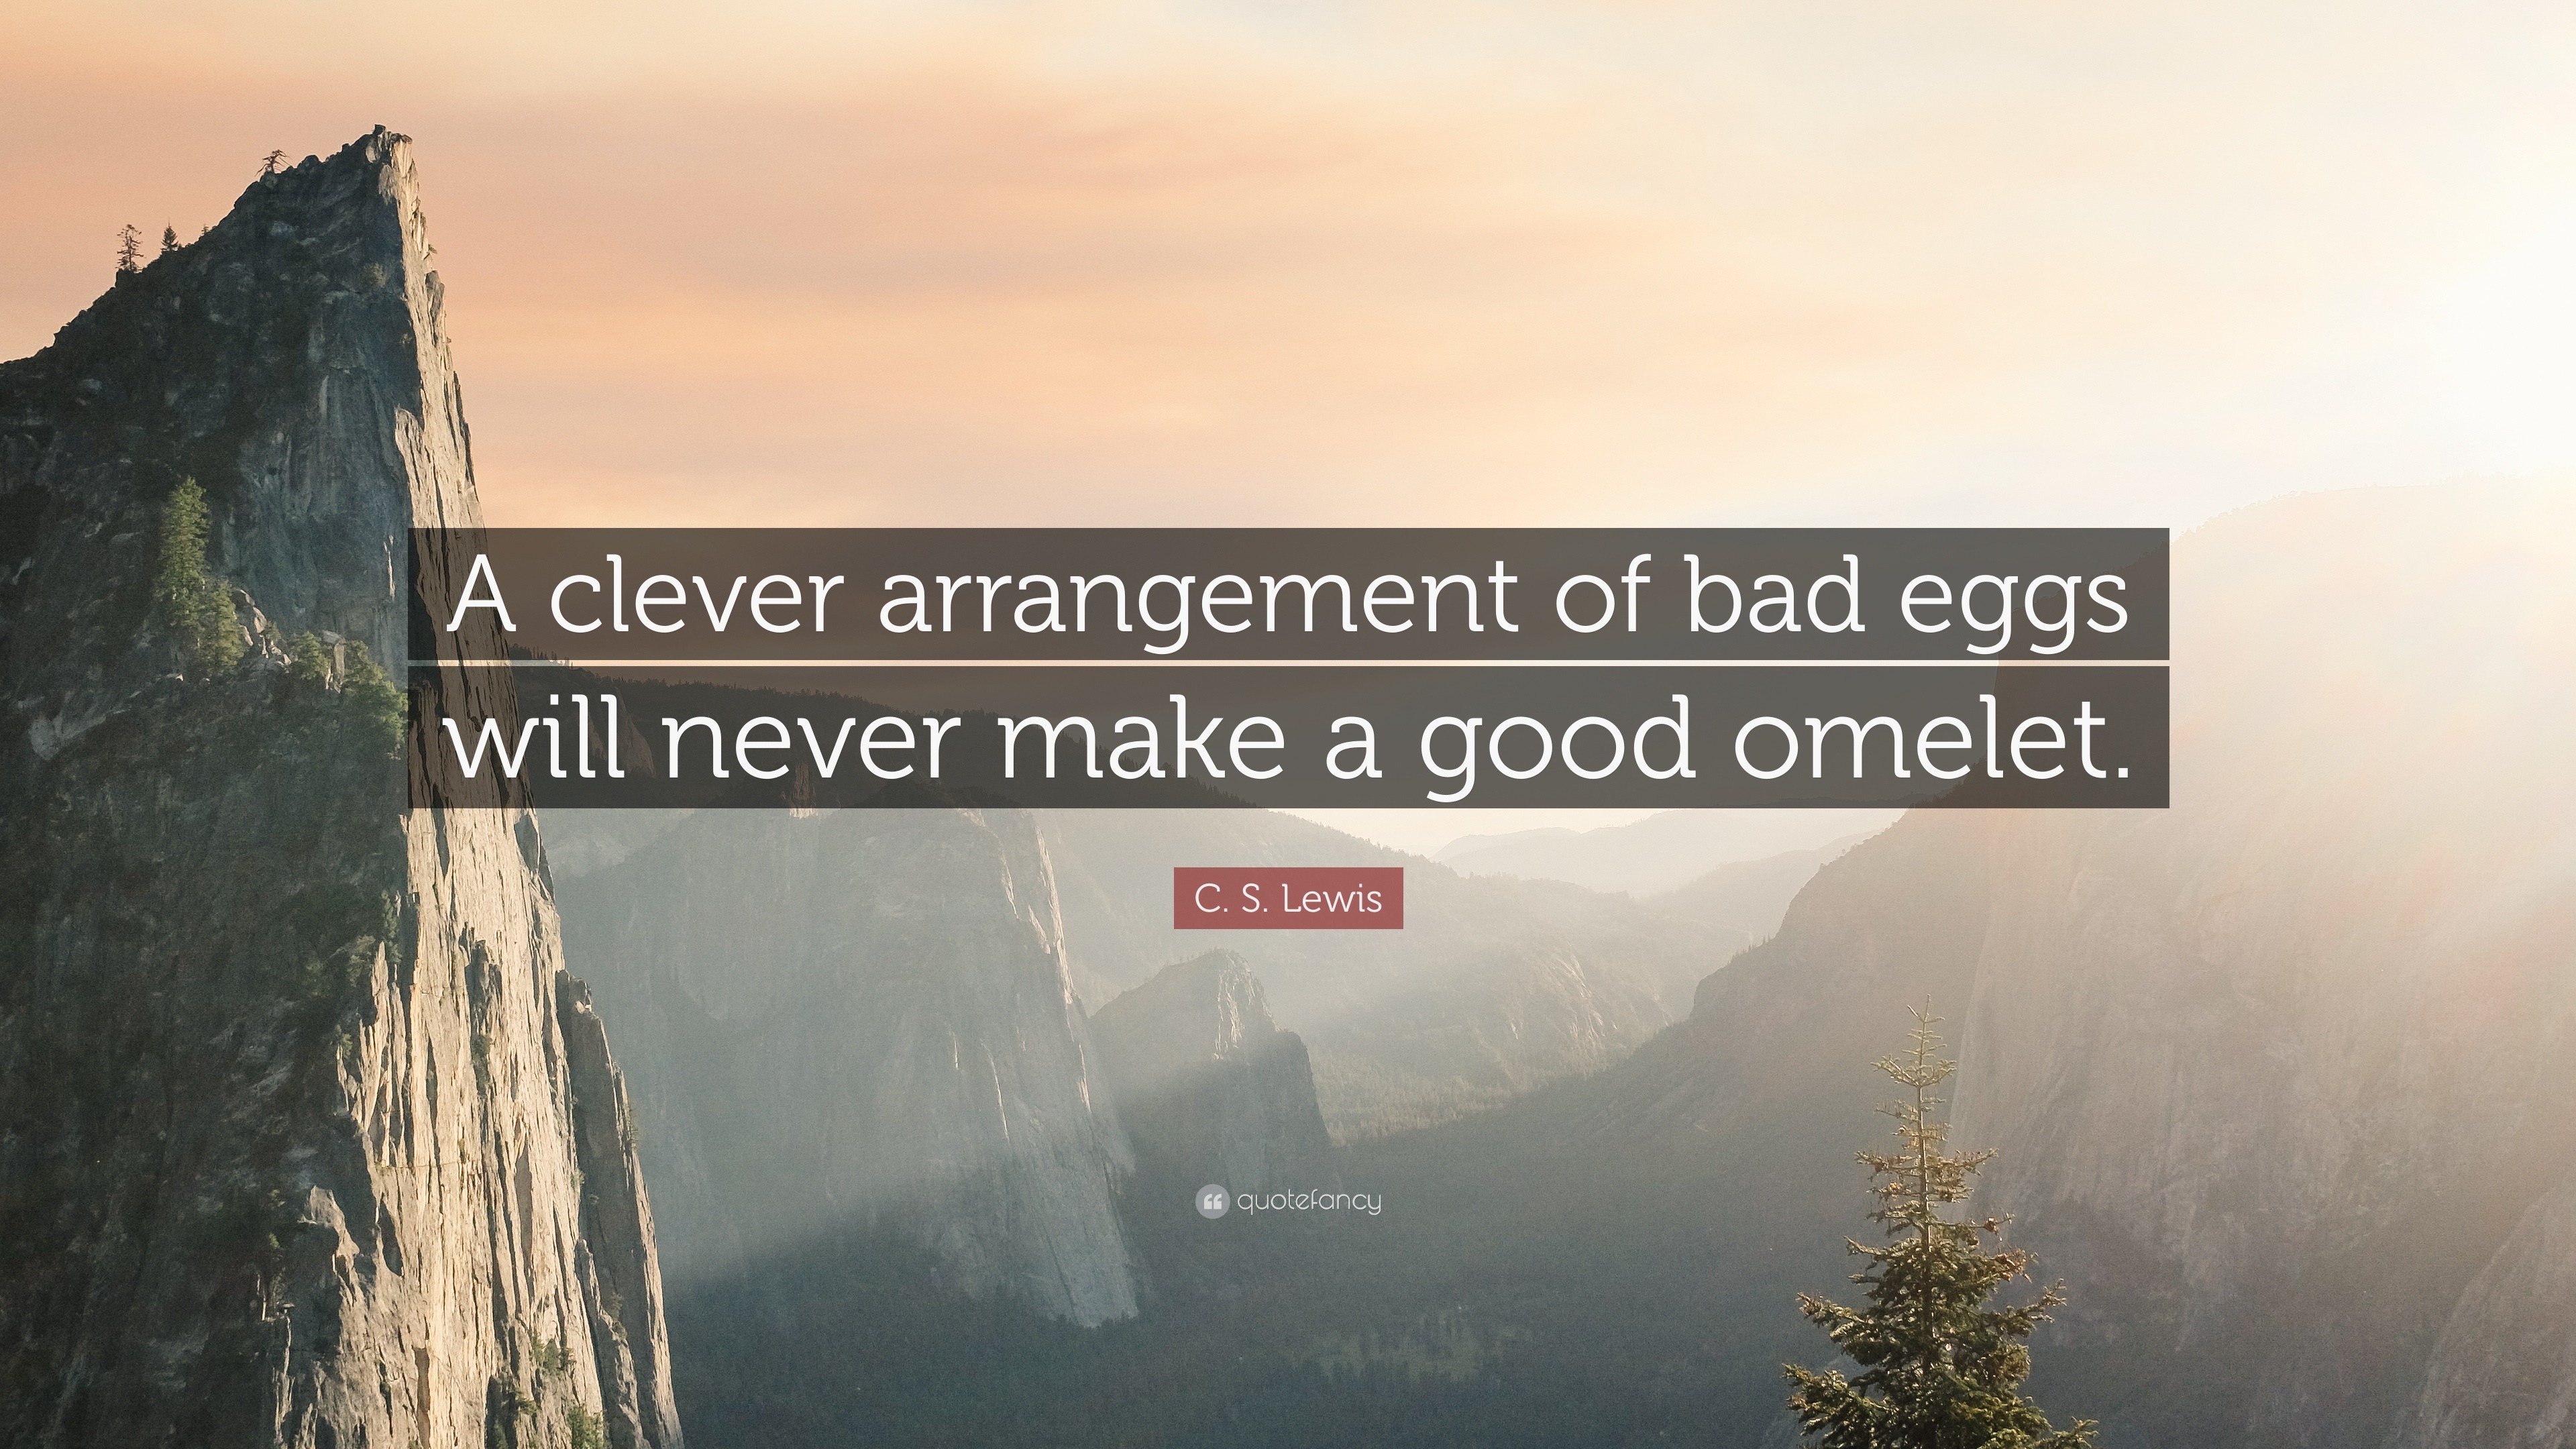 https://quotefancy.com/media/wallpaper/3840x2160/448424-C-S-Lewis-Quote-A-clever-arrangement-of-bad-eggs-will-never-make-a.jpg